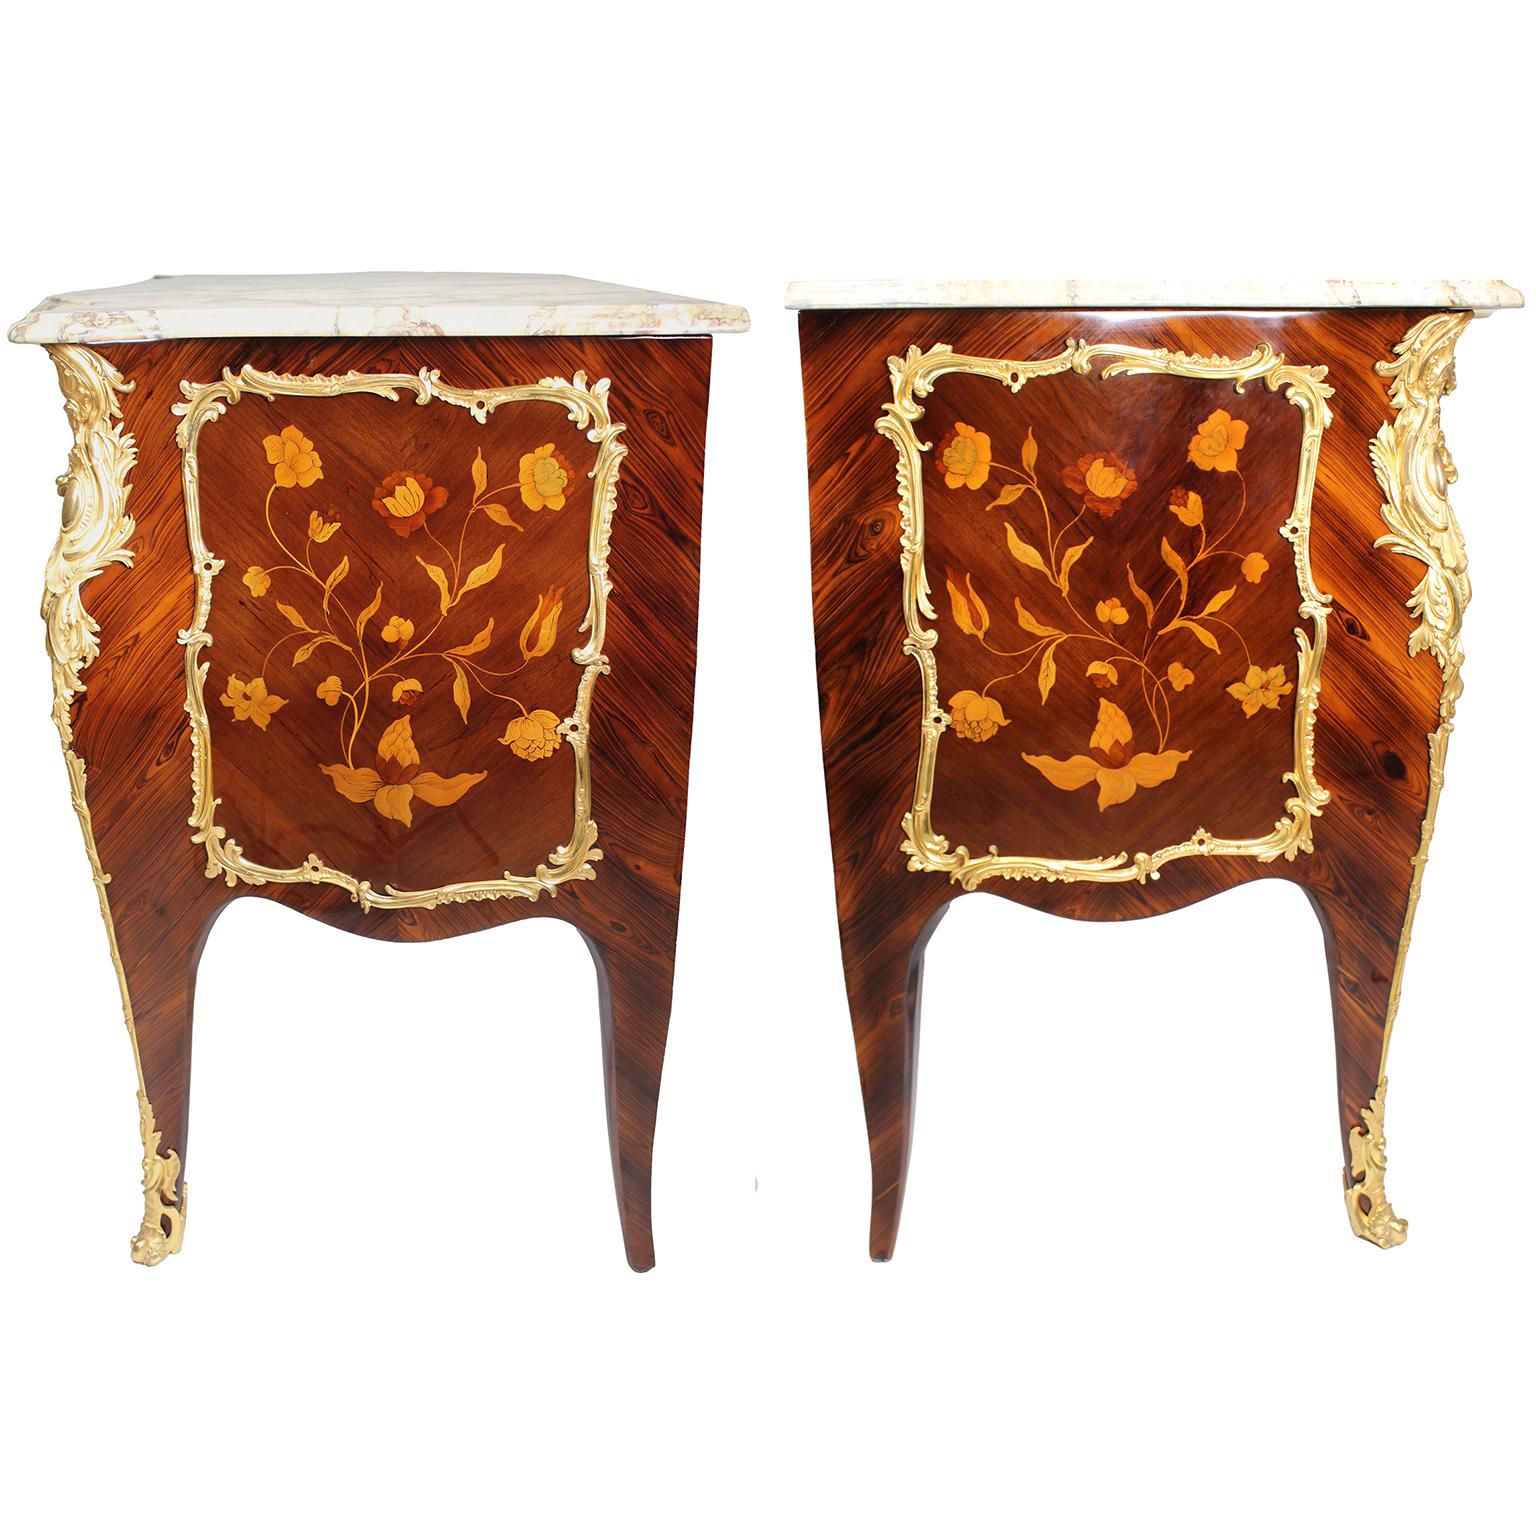 Fine Pair French 19th Century Louis XV Style Gilt-Bronze & Marquetry Commodes For Sale 13